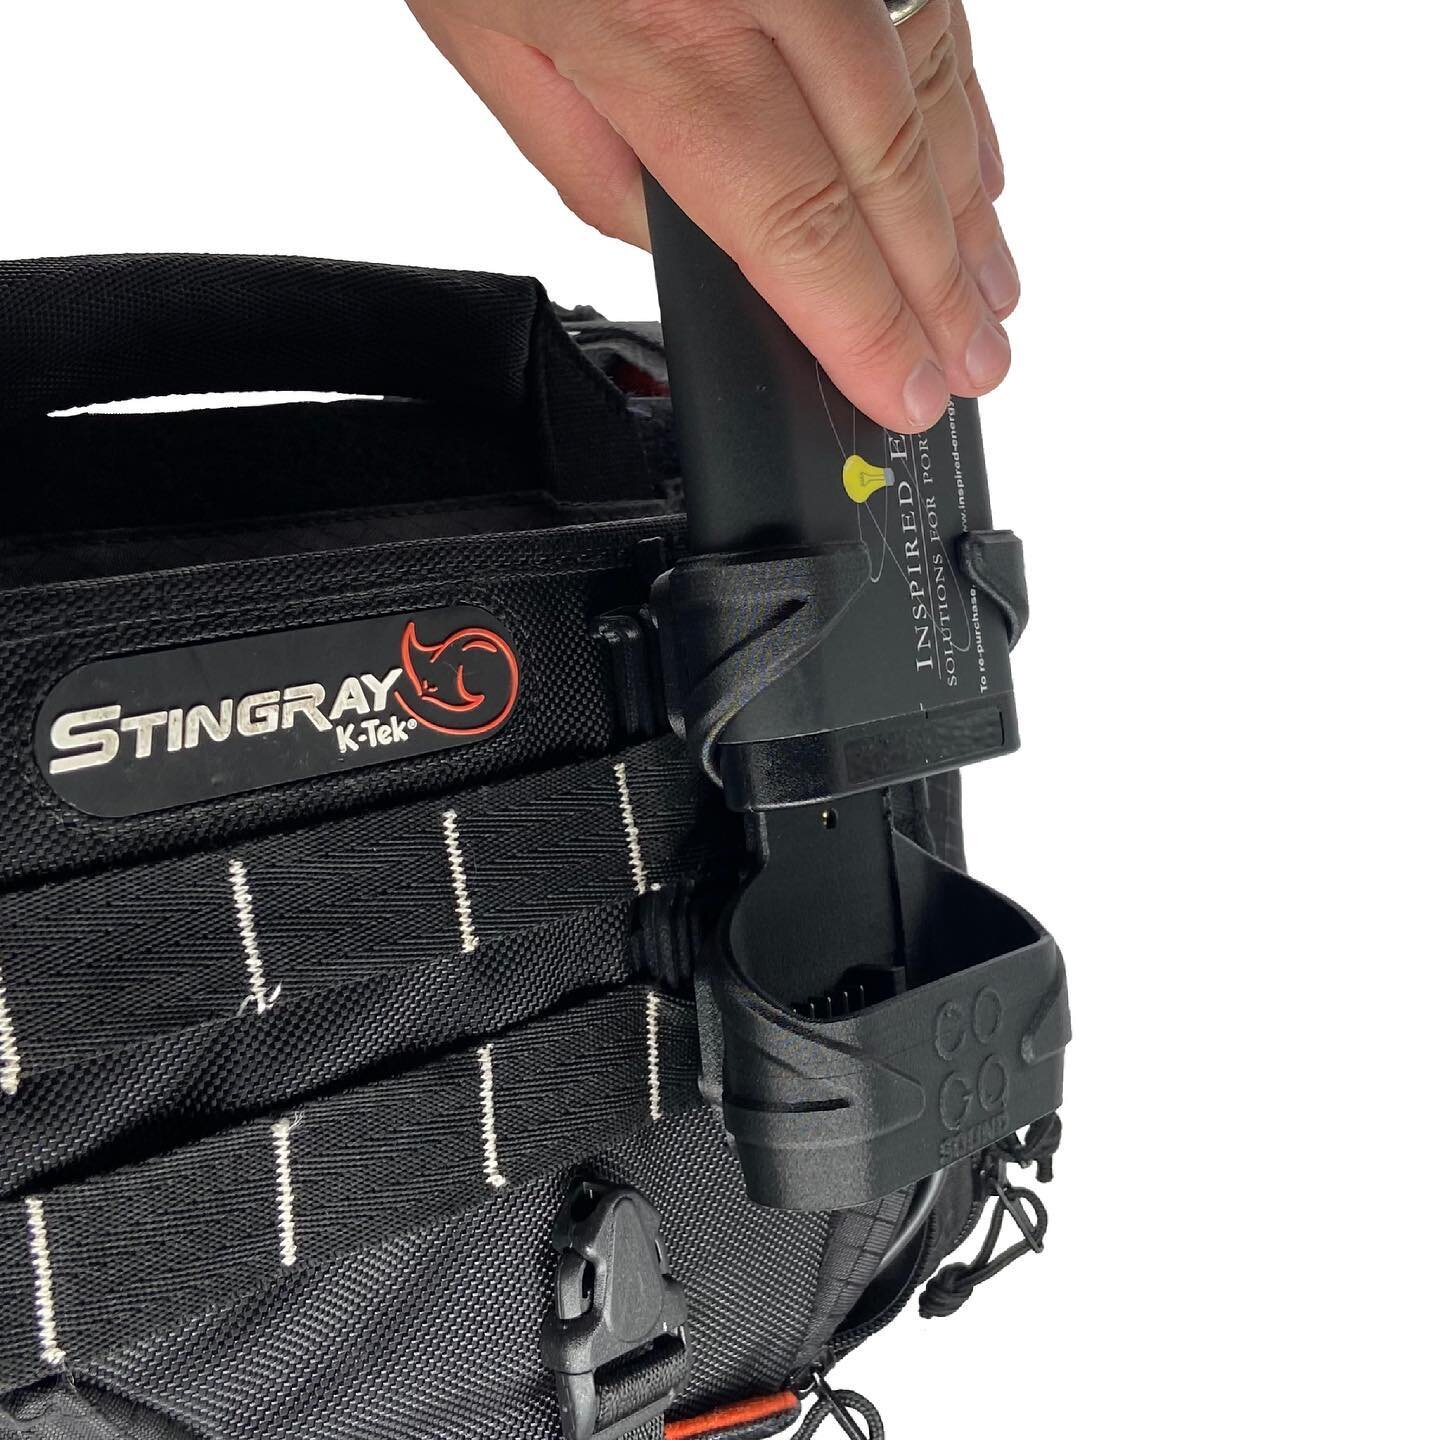 How long does it take to swap a battery? With the COGA Sound BPS quick draw feature, batteries can be changed extremely quickly with one hand! 
.
No more digging in your bag
.
No more fumbling the cup off 
.
No more delay of production 
.
Sound speed